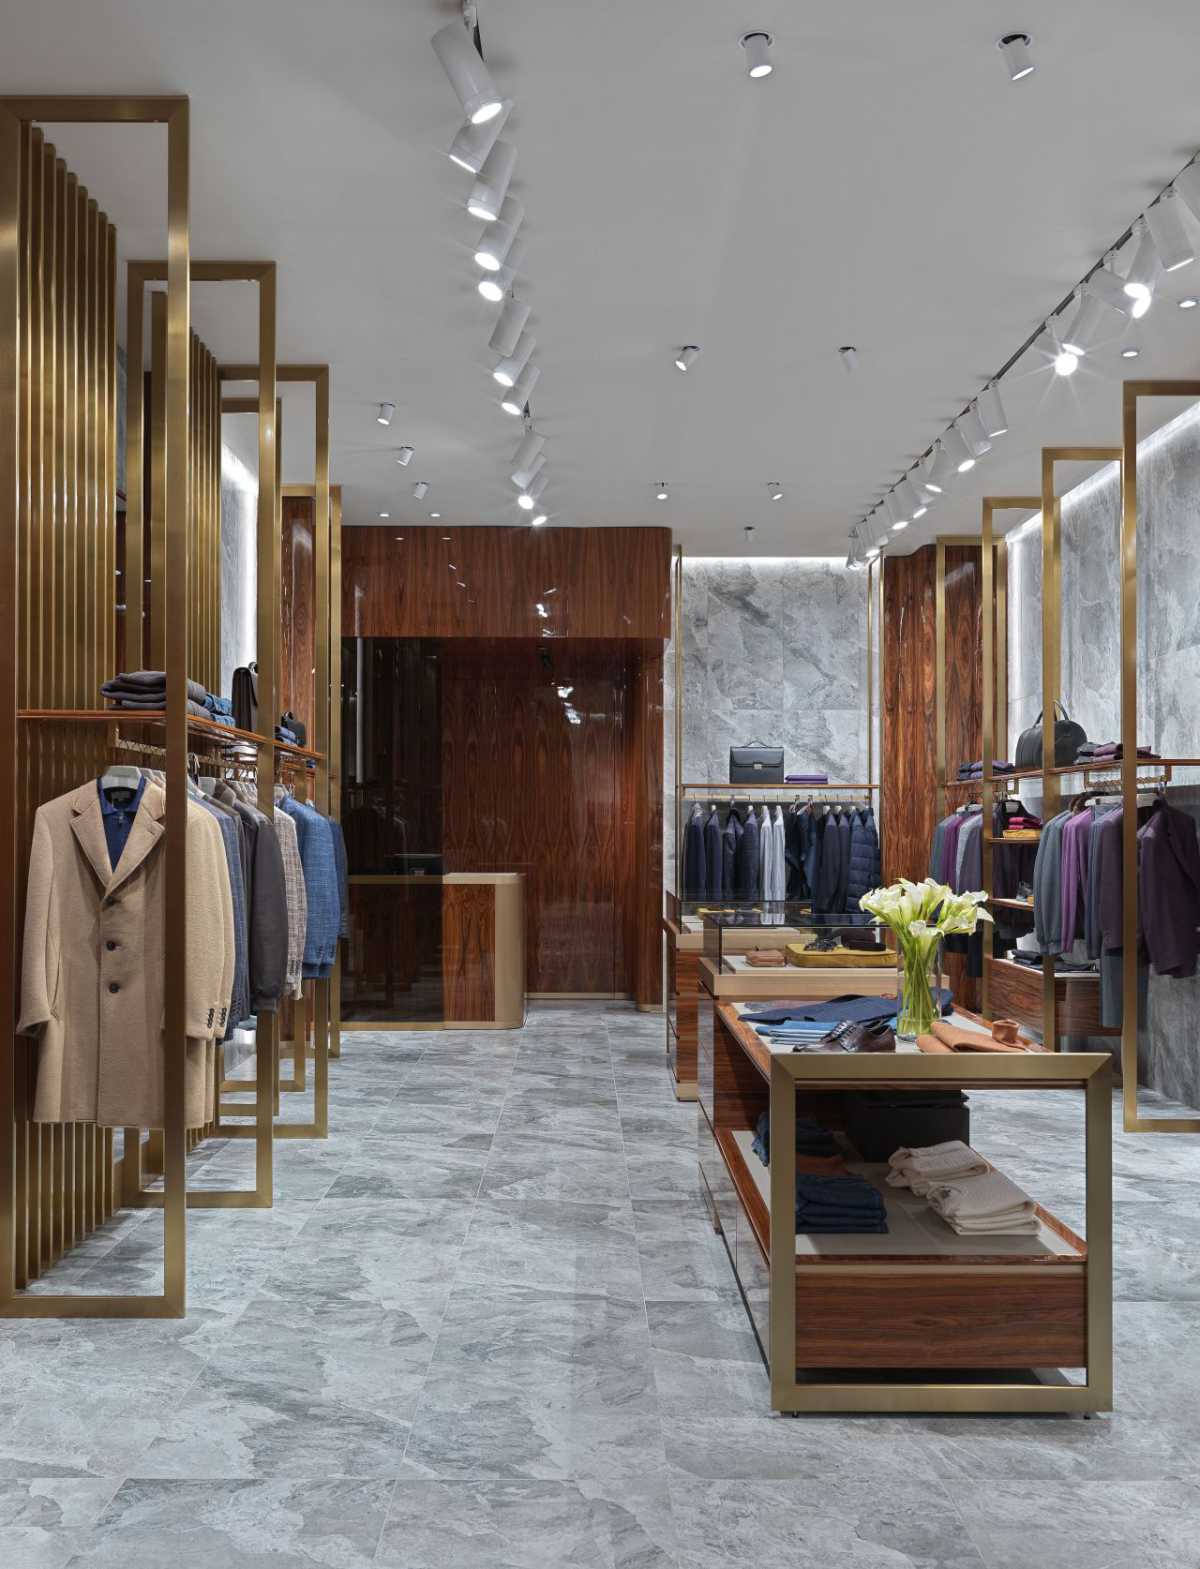 Canali opened a new flagship store in St. Petersburg